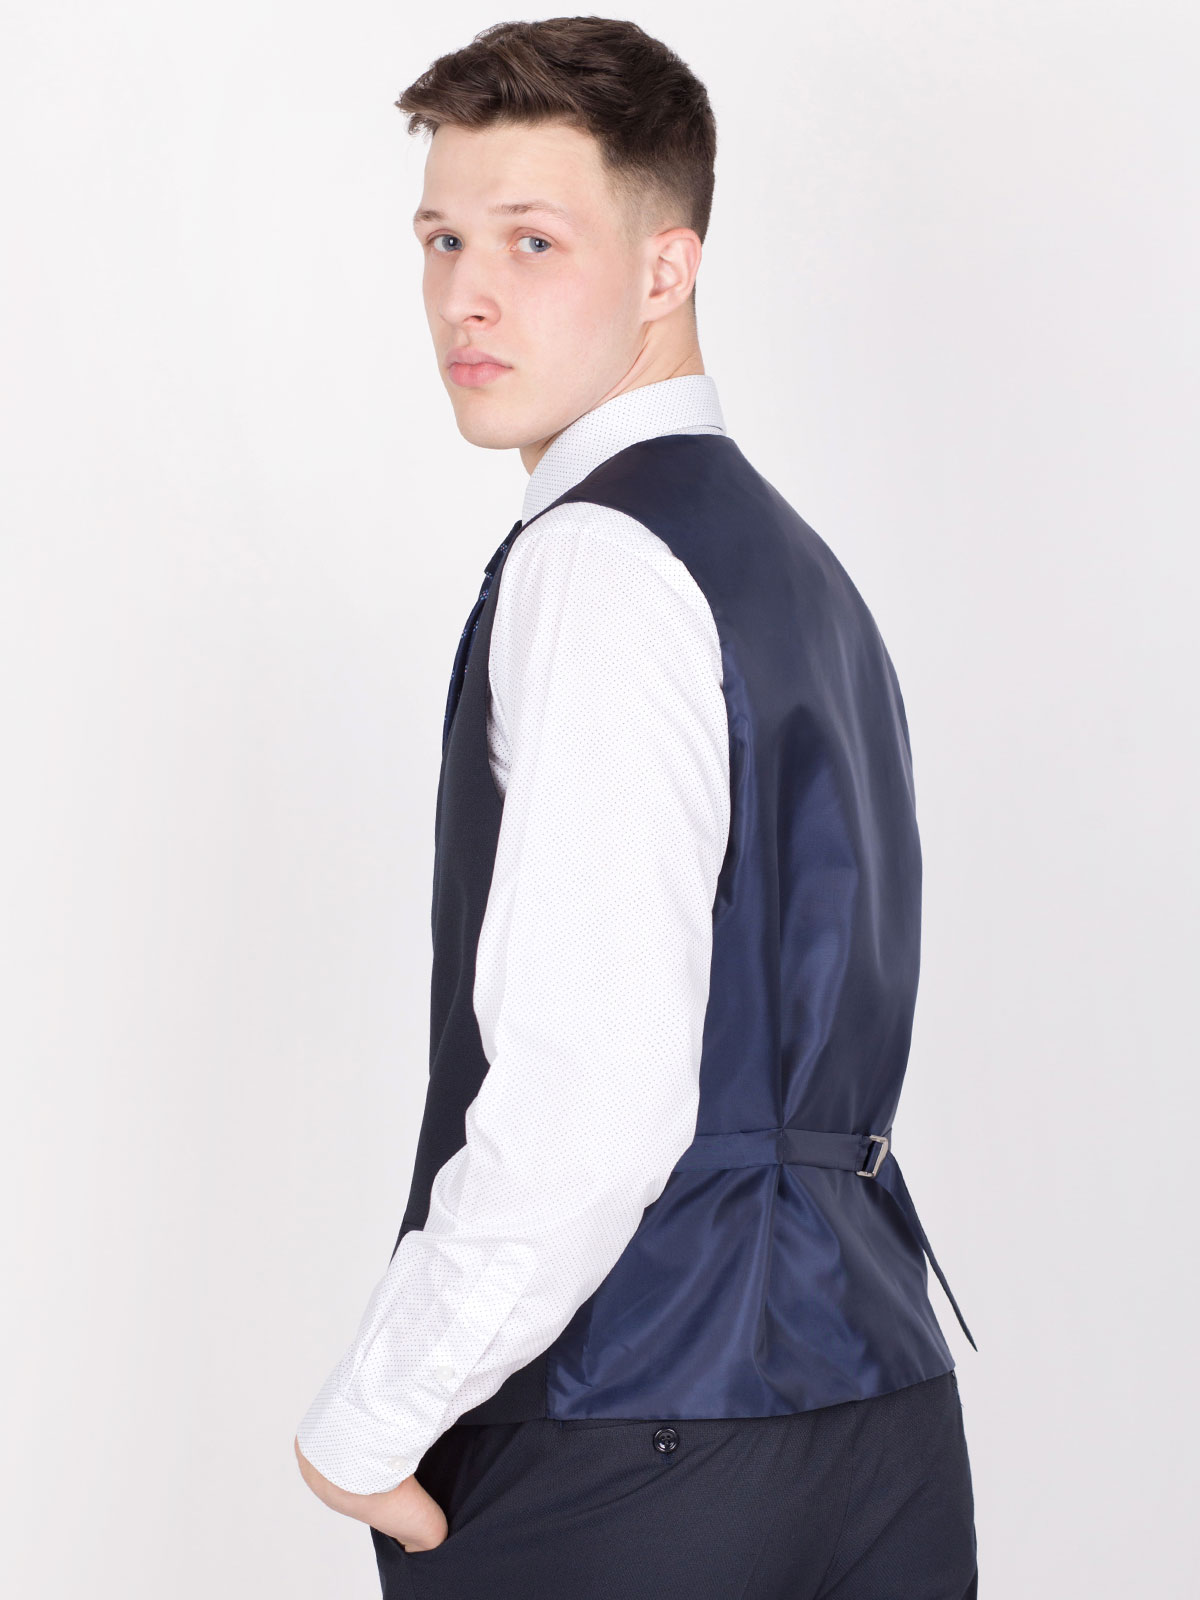  classic navy blue small cell vest  - 44053 € 21.93 img3